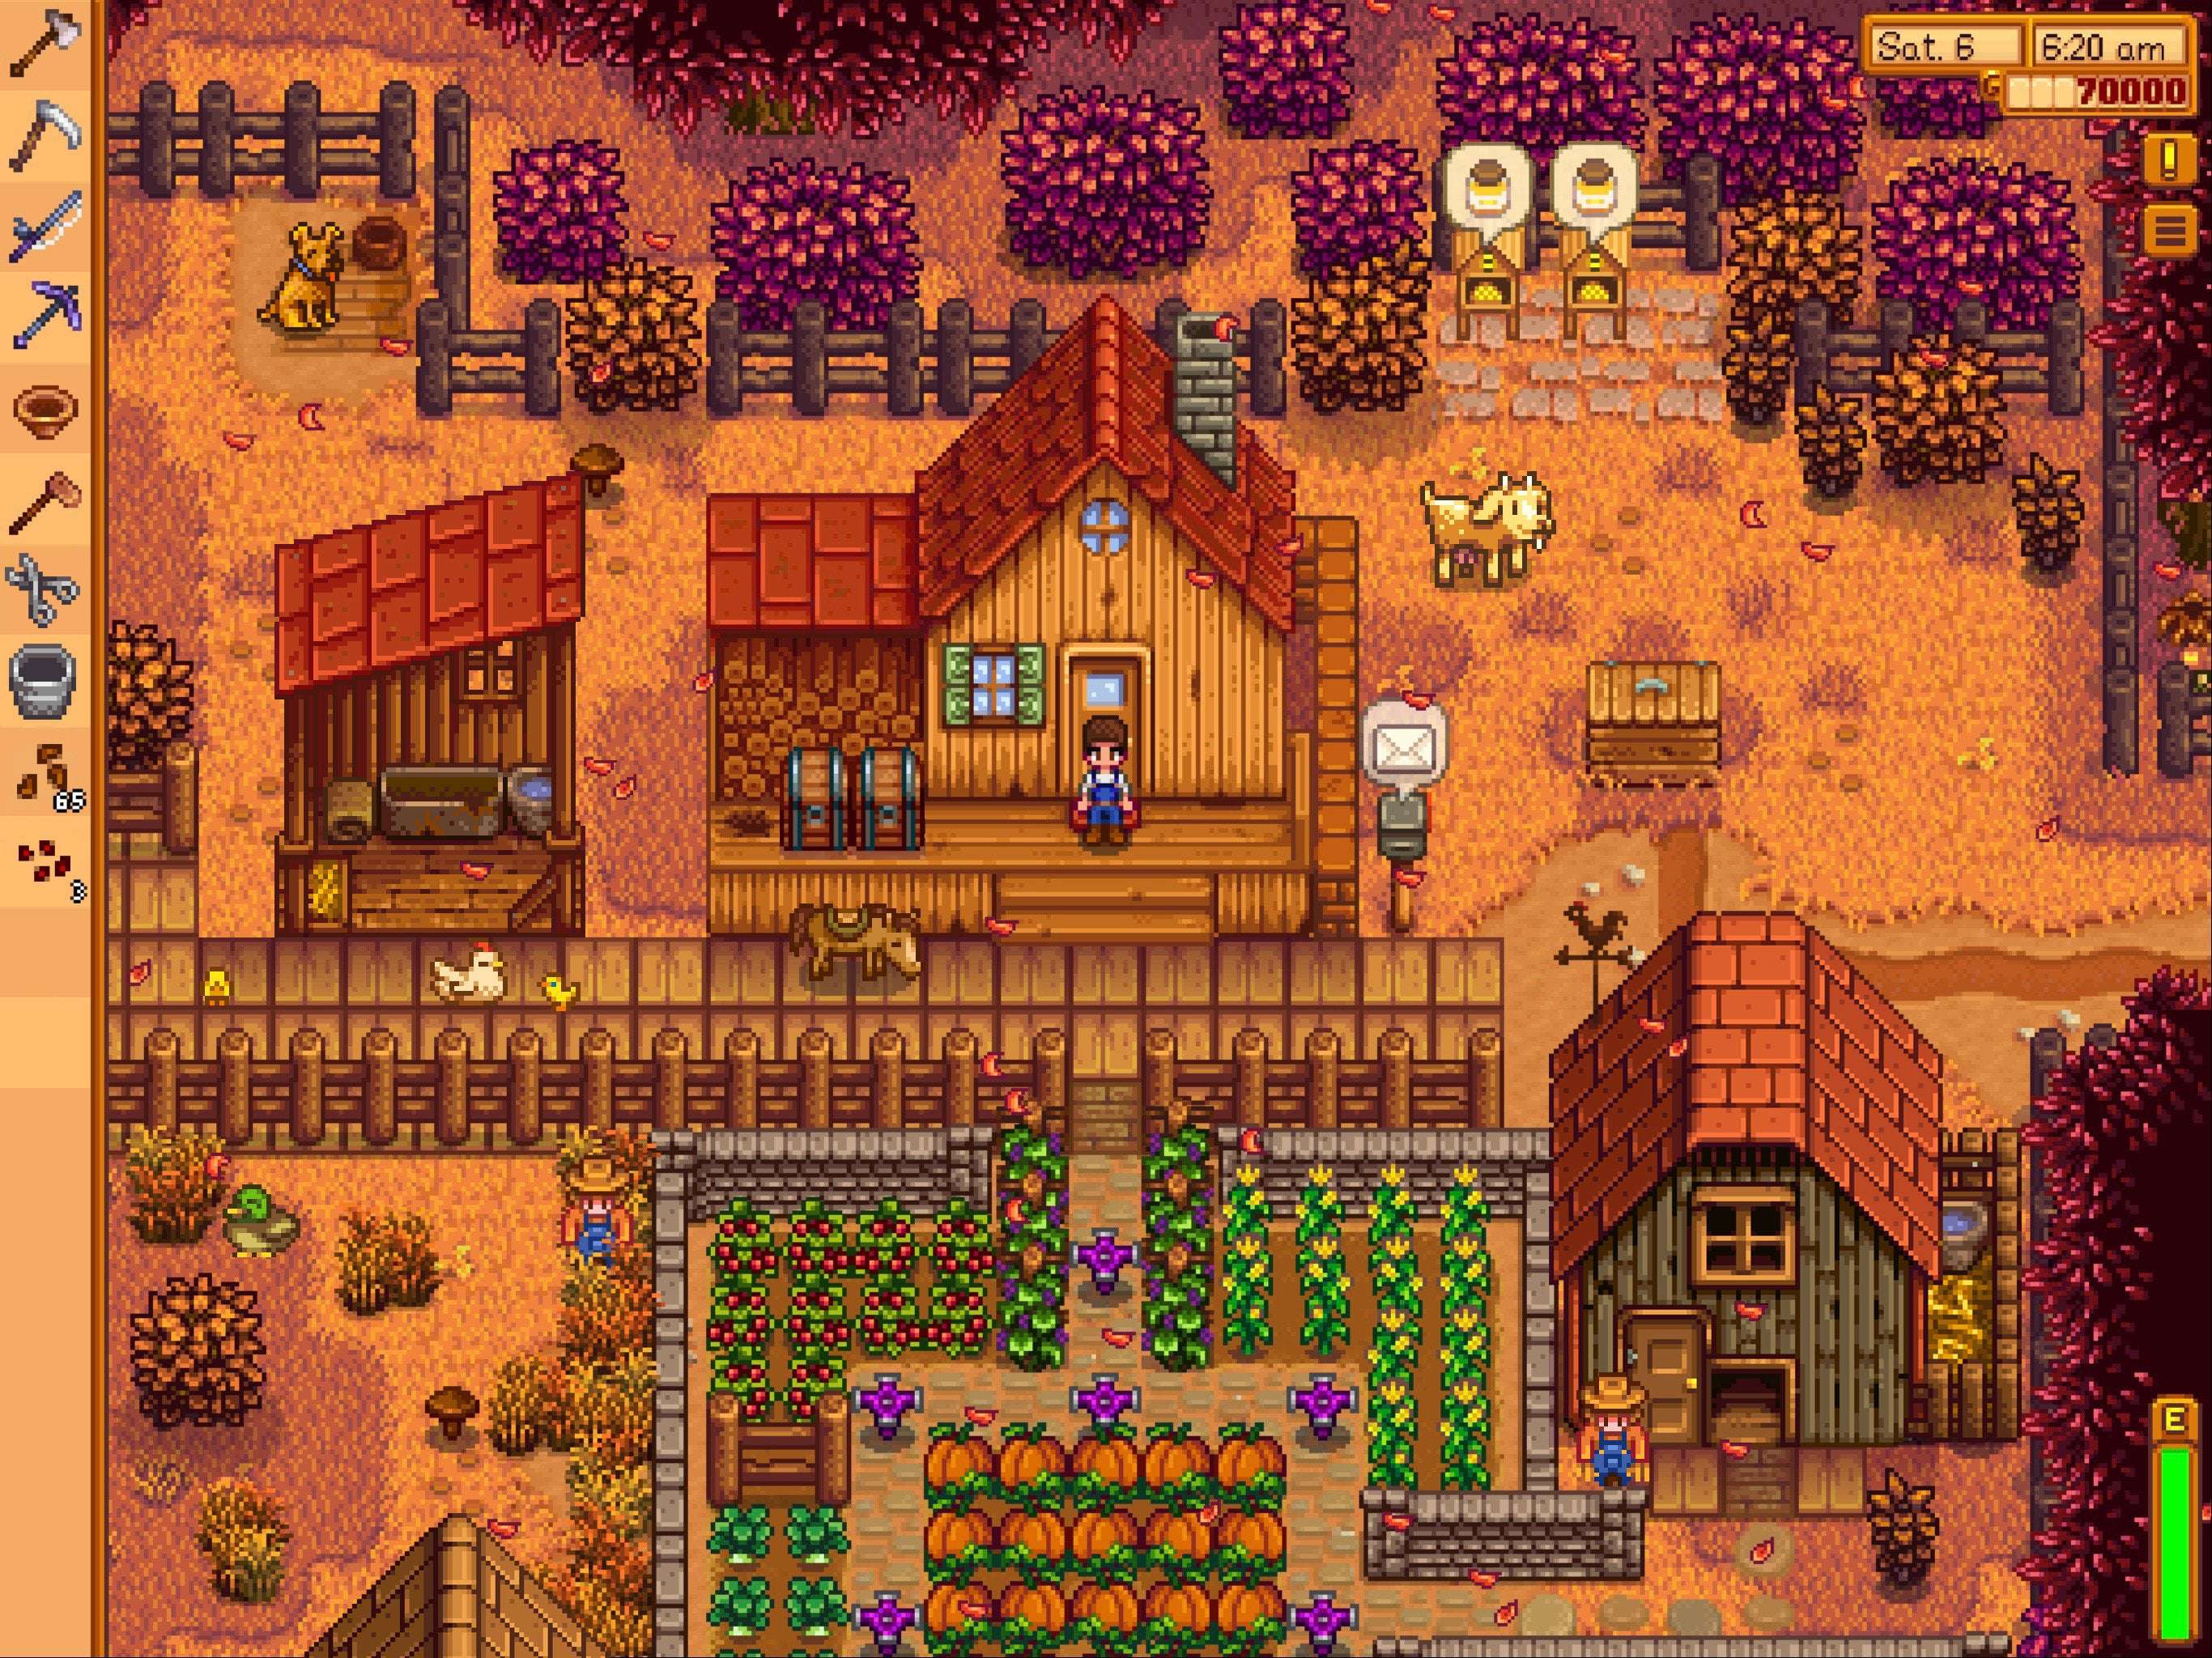 image for Since release, Stardew Valley has sold over 15 million copies worldwide